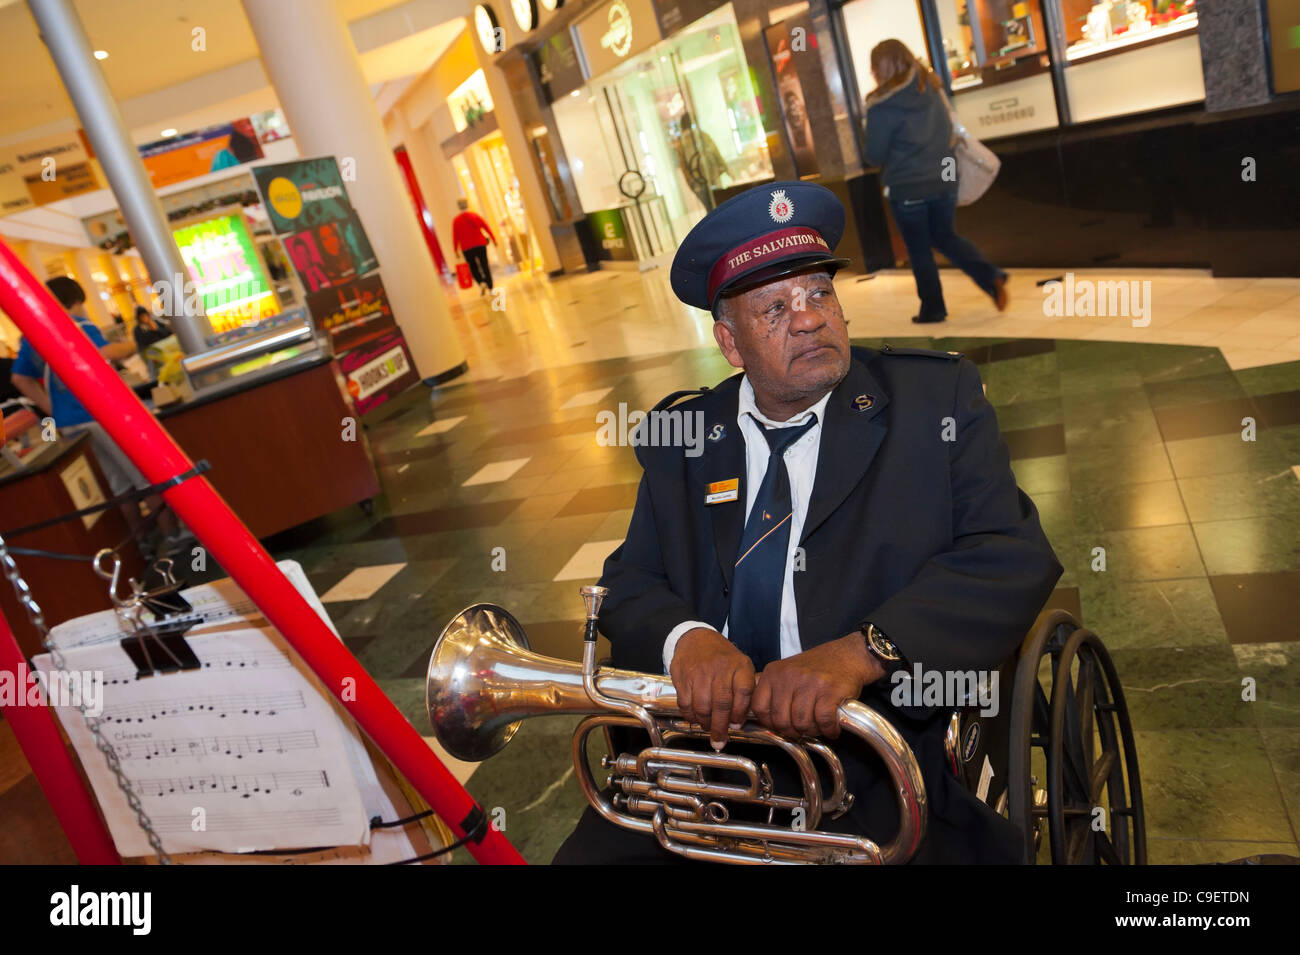 GARDEN CITY, NY, USA - DECEMBER 09: Salvation Army, a charitable and religious organization, member with trumpet helps raise funds for group's Red Kettle campaign at Roosevelt Field Shopping Mall, New York, on Friday, Dec. 9, 2011. Musician Neville Lyttle (in wheelchair) came from Hempstead group. Stock Photo